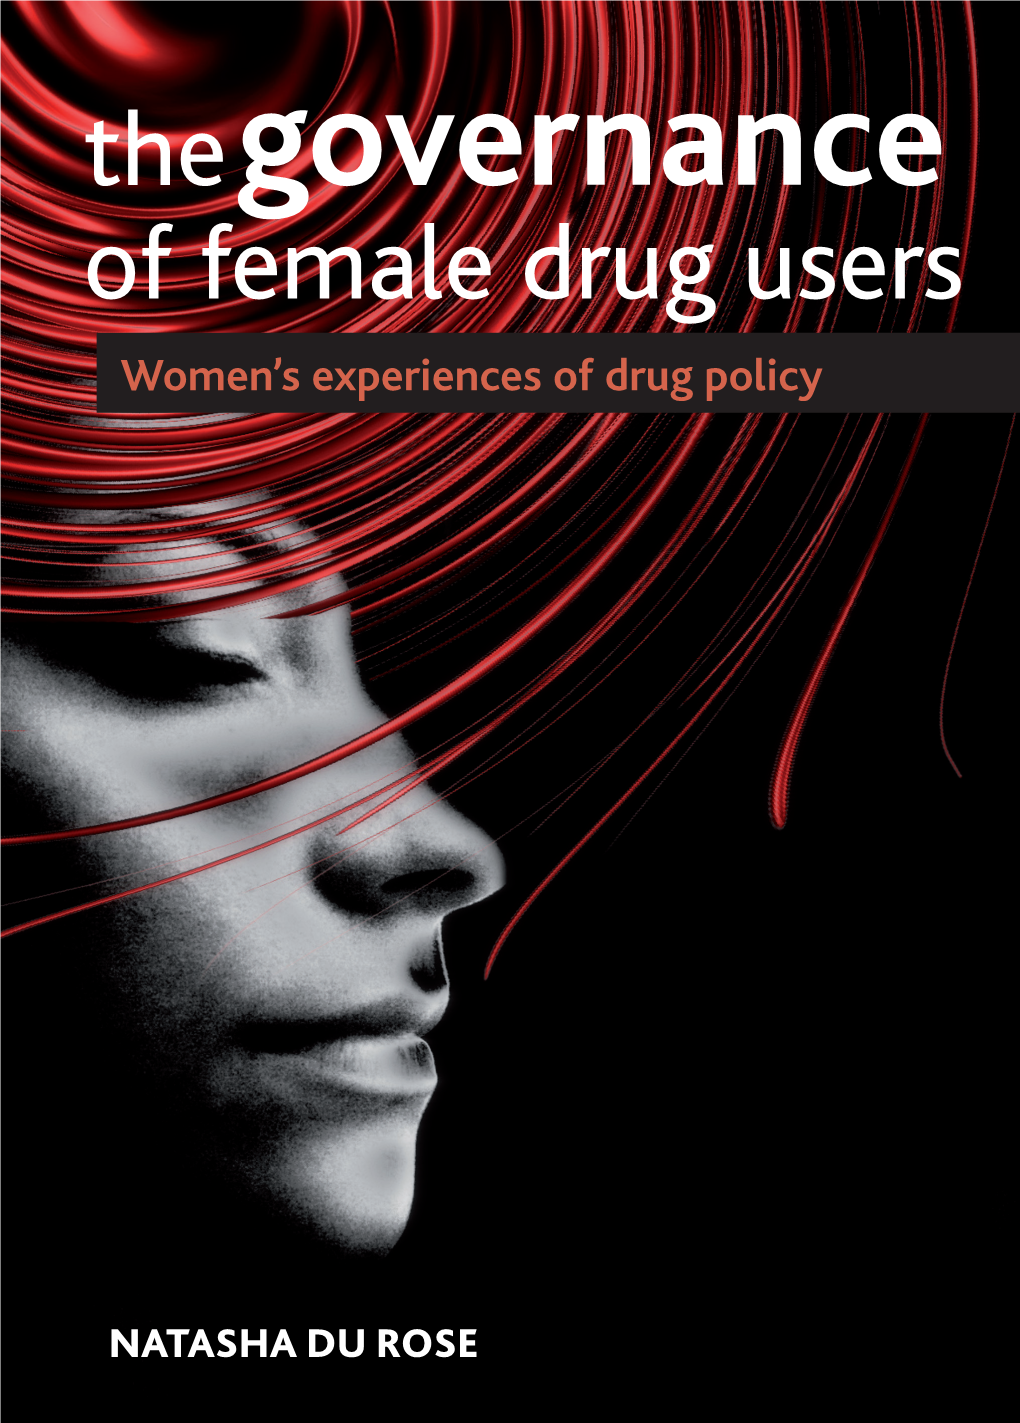 Of Female Drug Users Women’S Experiences of Drug Policy